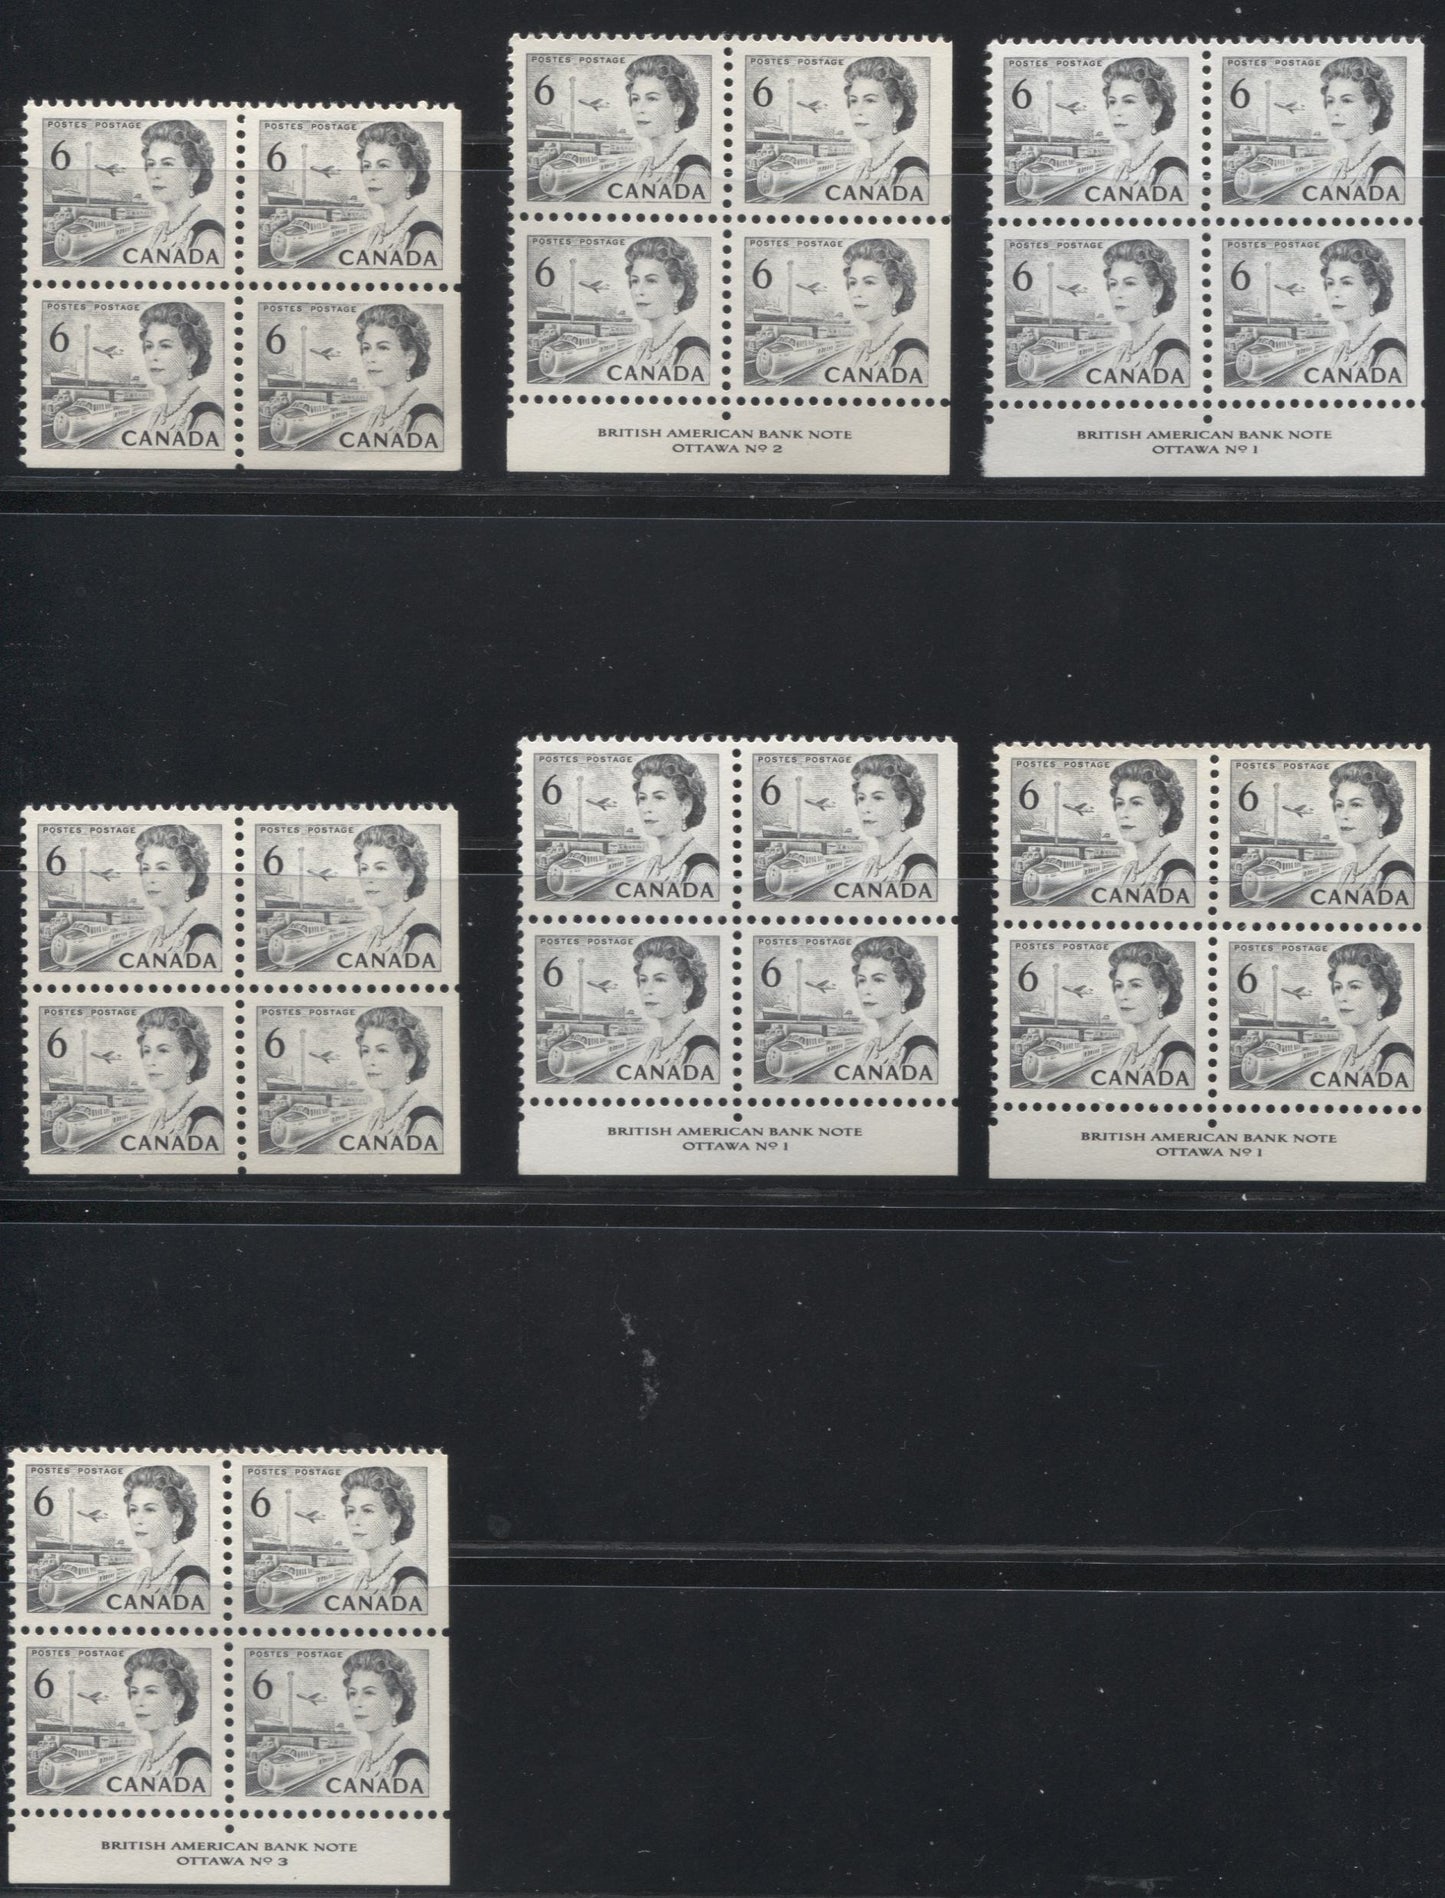 Lot 52 Canada #460 6c Black Queen Elizabeth II, 1967-1973 Centennial Issue, Seven Lower Right VFNH Plate 1, 2, 3 Or Blank Blocks Of 4 On Various DF Papers With Dex Gum